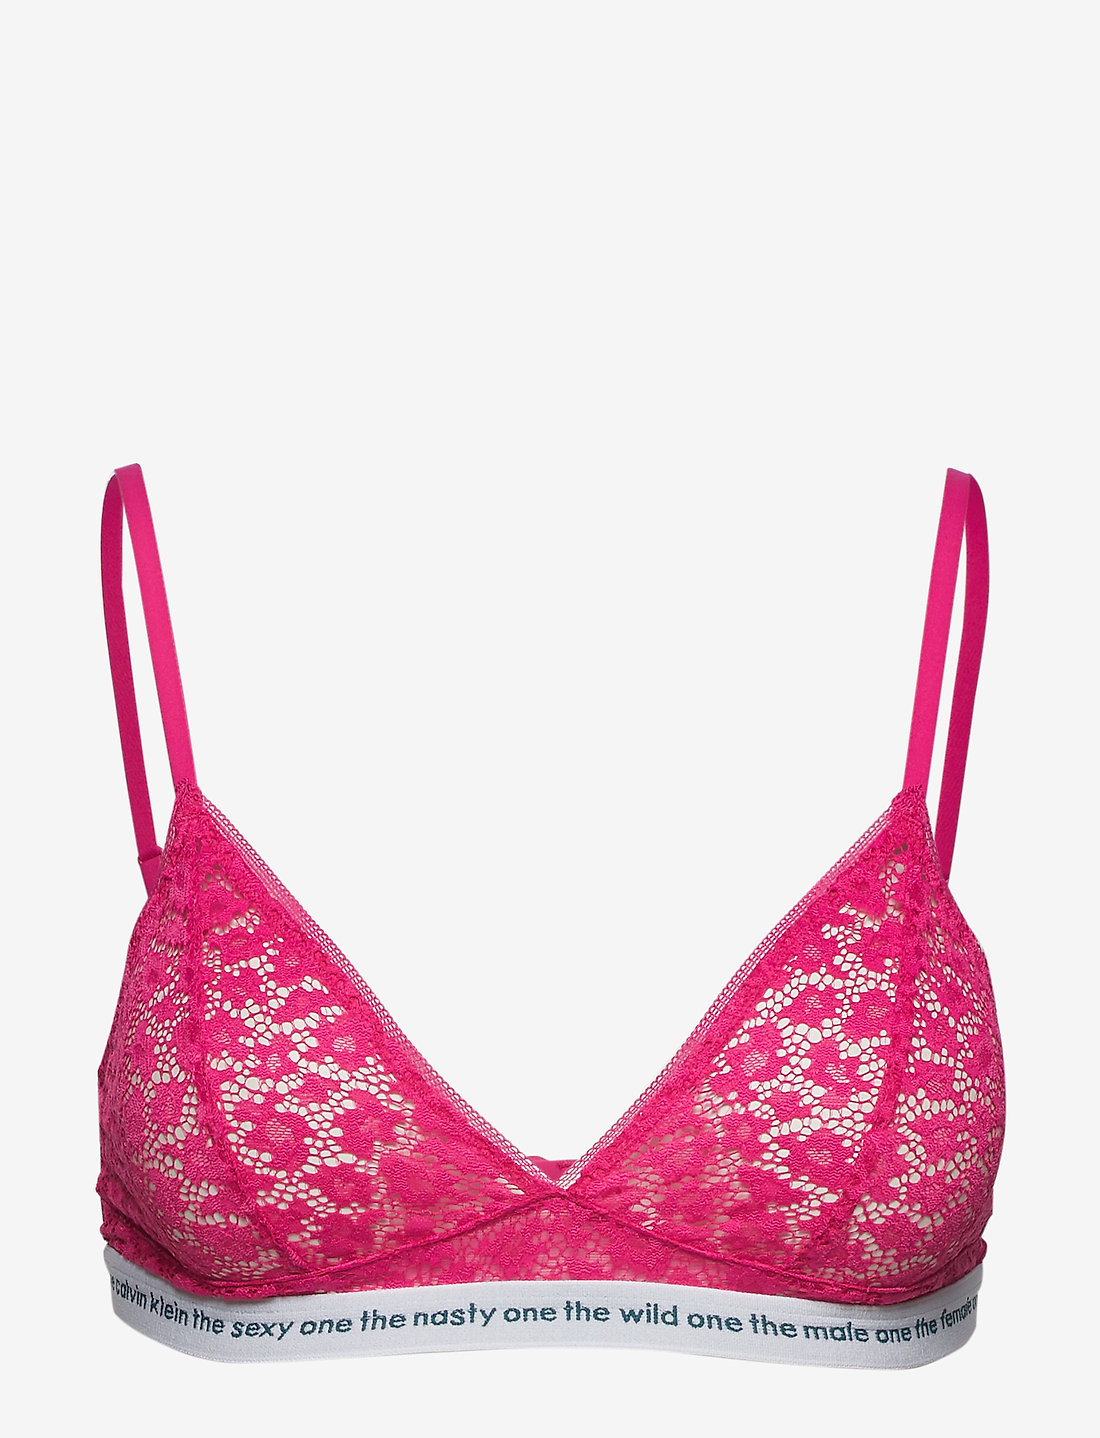 Calvin Klein Unlined Triangle, 00 (Thrill/Pink) - 39.90 €